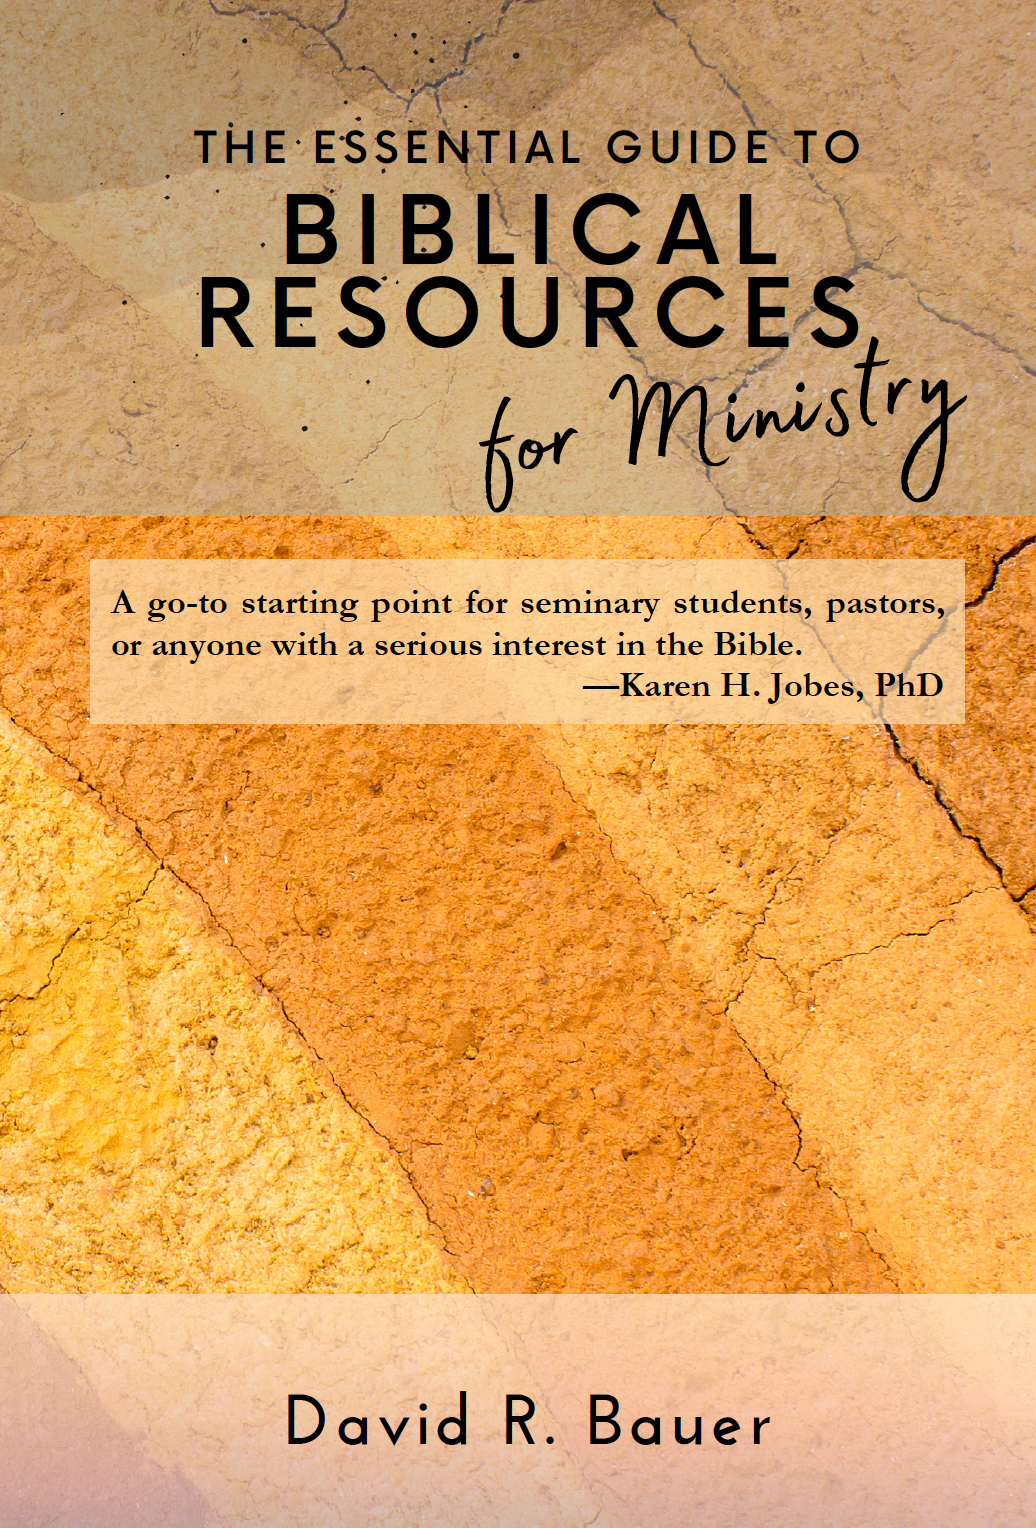 The Essential Guide to Biblical Resources for Ministry